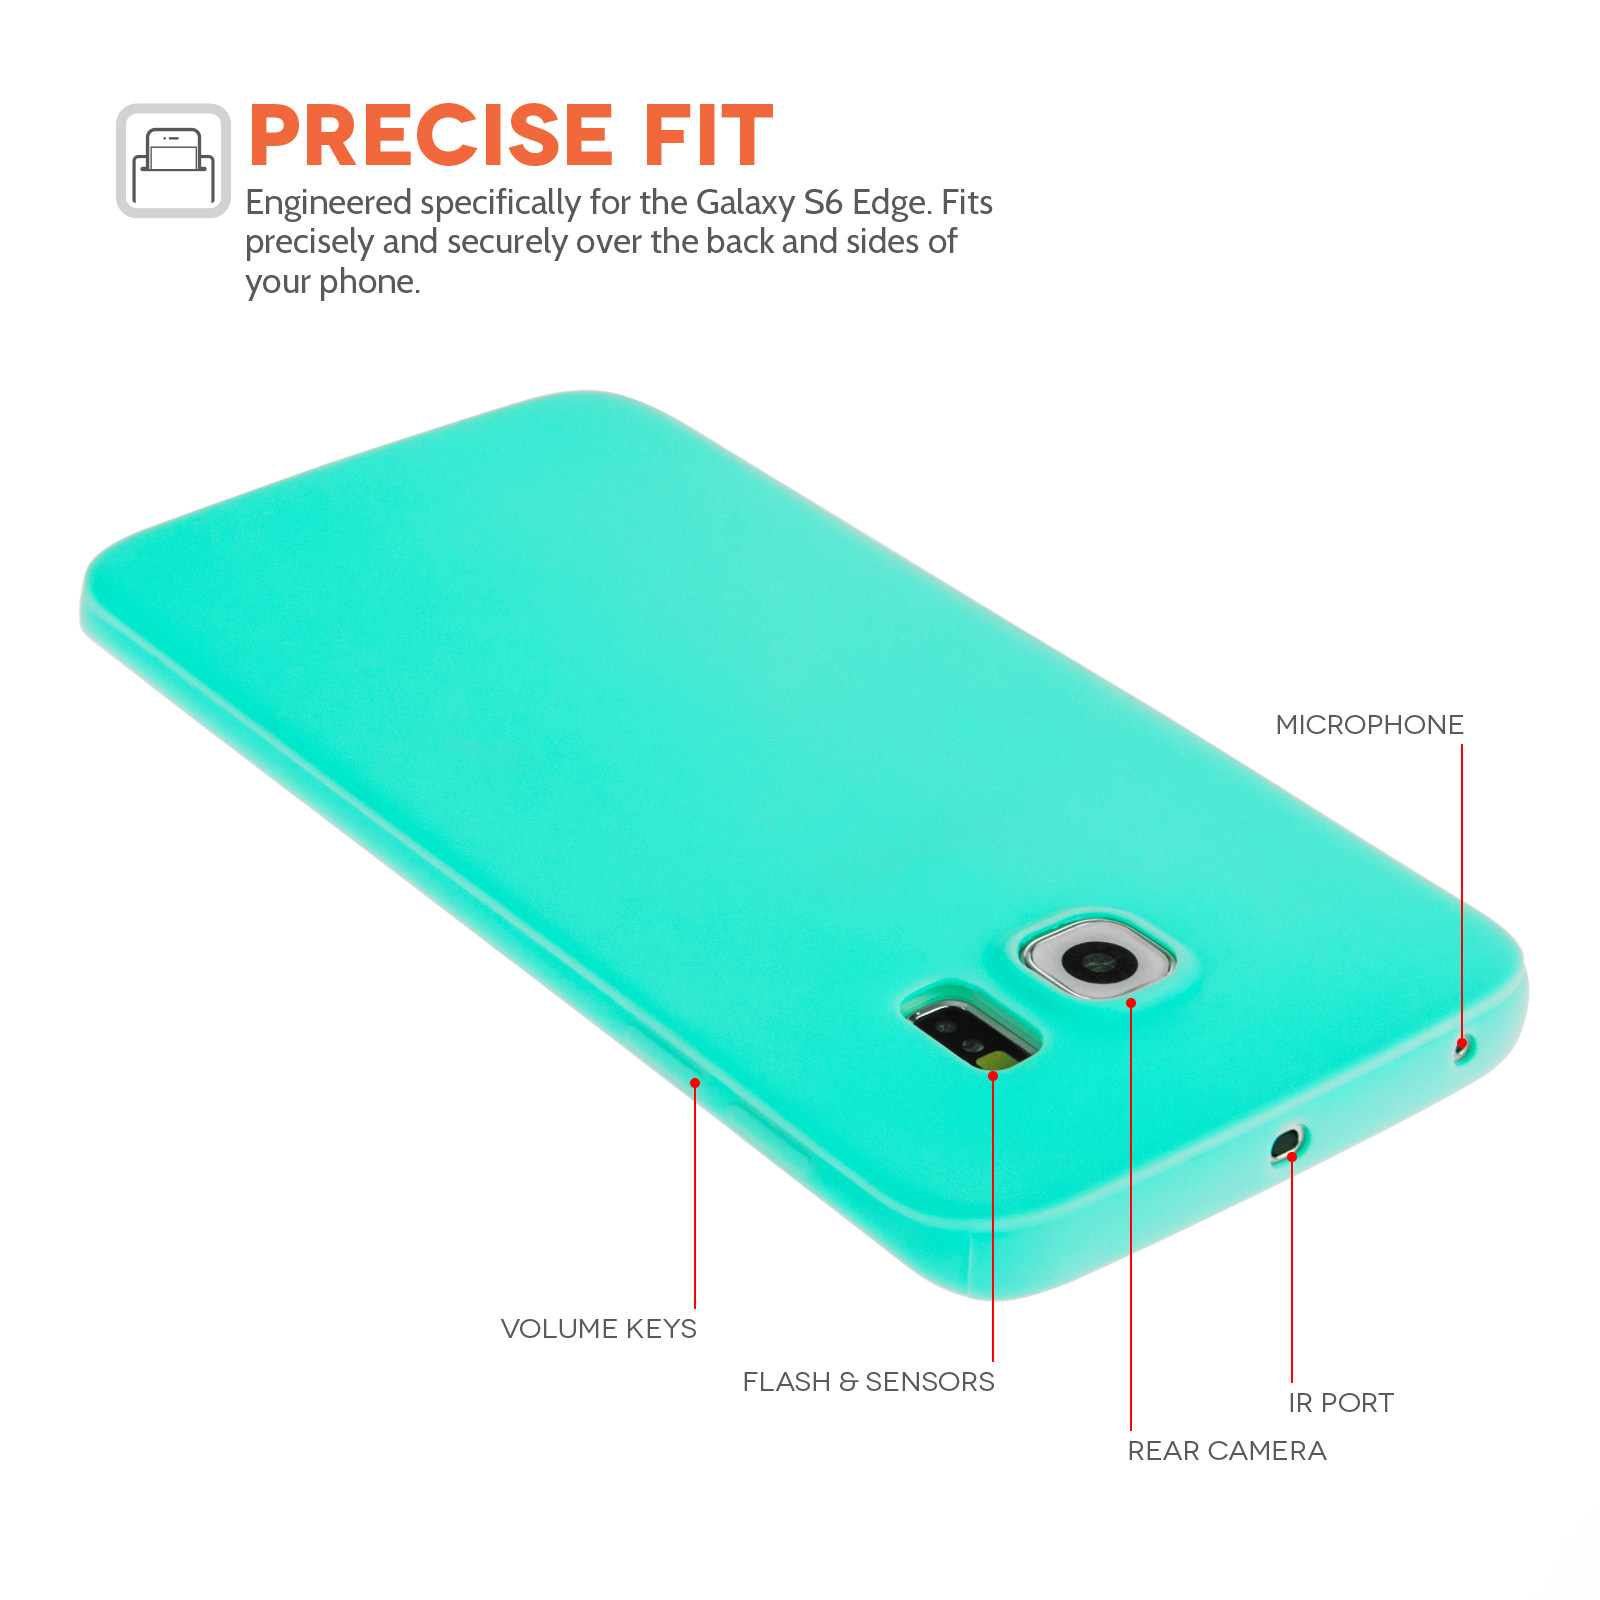 Yousave Accessories Samsung Galaxy S6 Edge New Slim Ultra Thin Gel - Solid Light Blue (Mint Green) Case